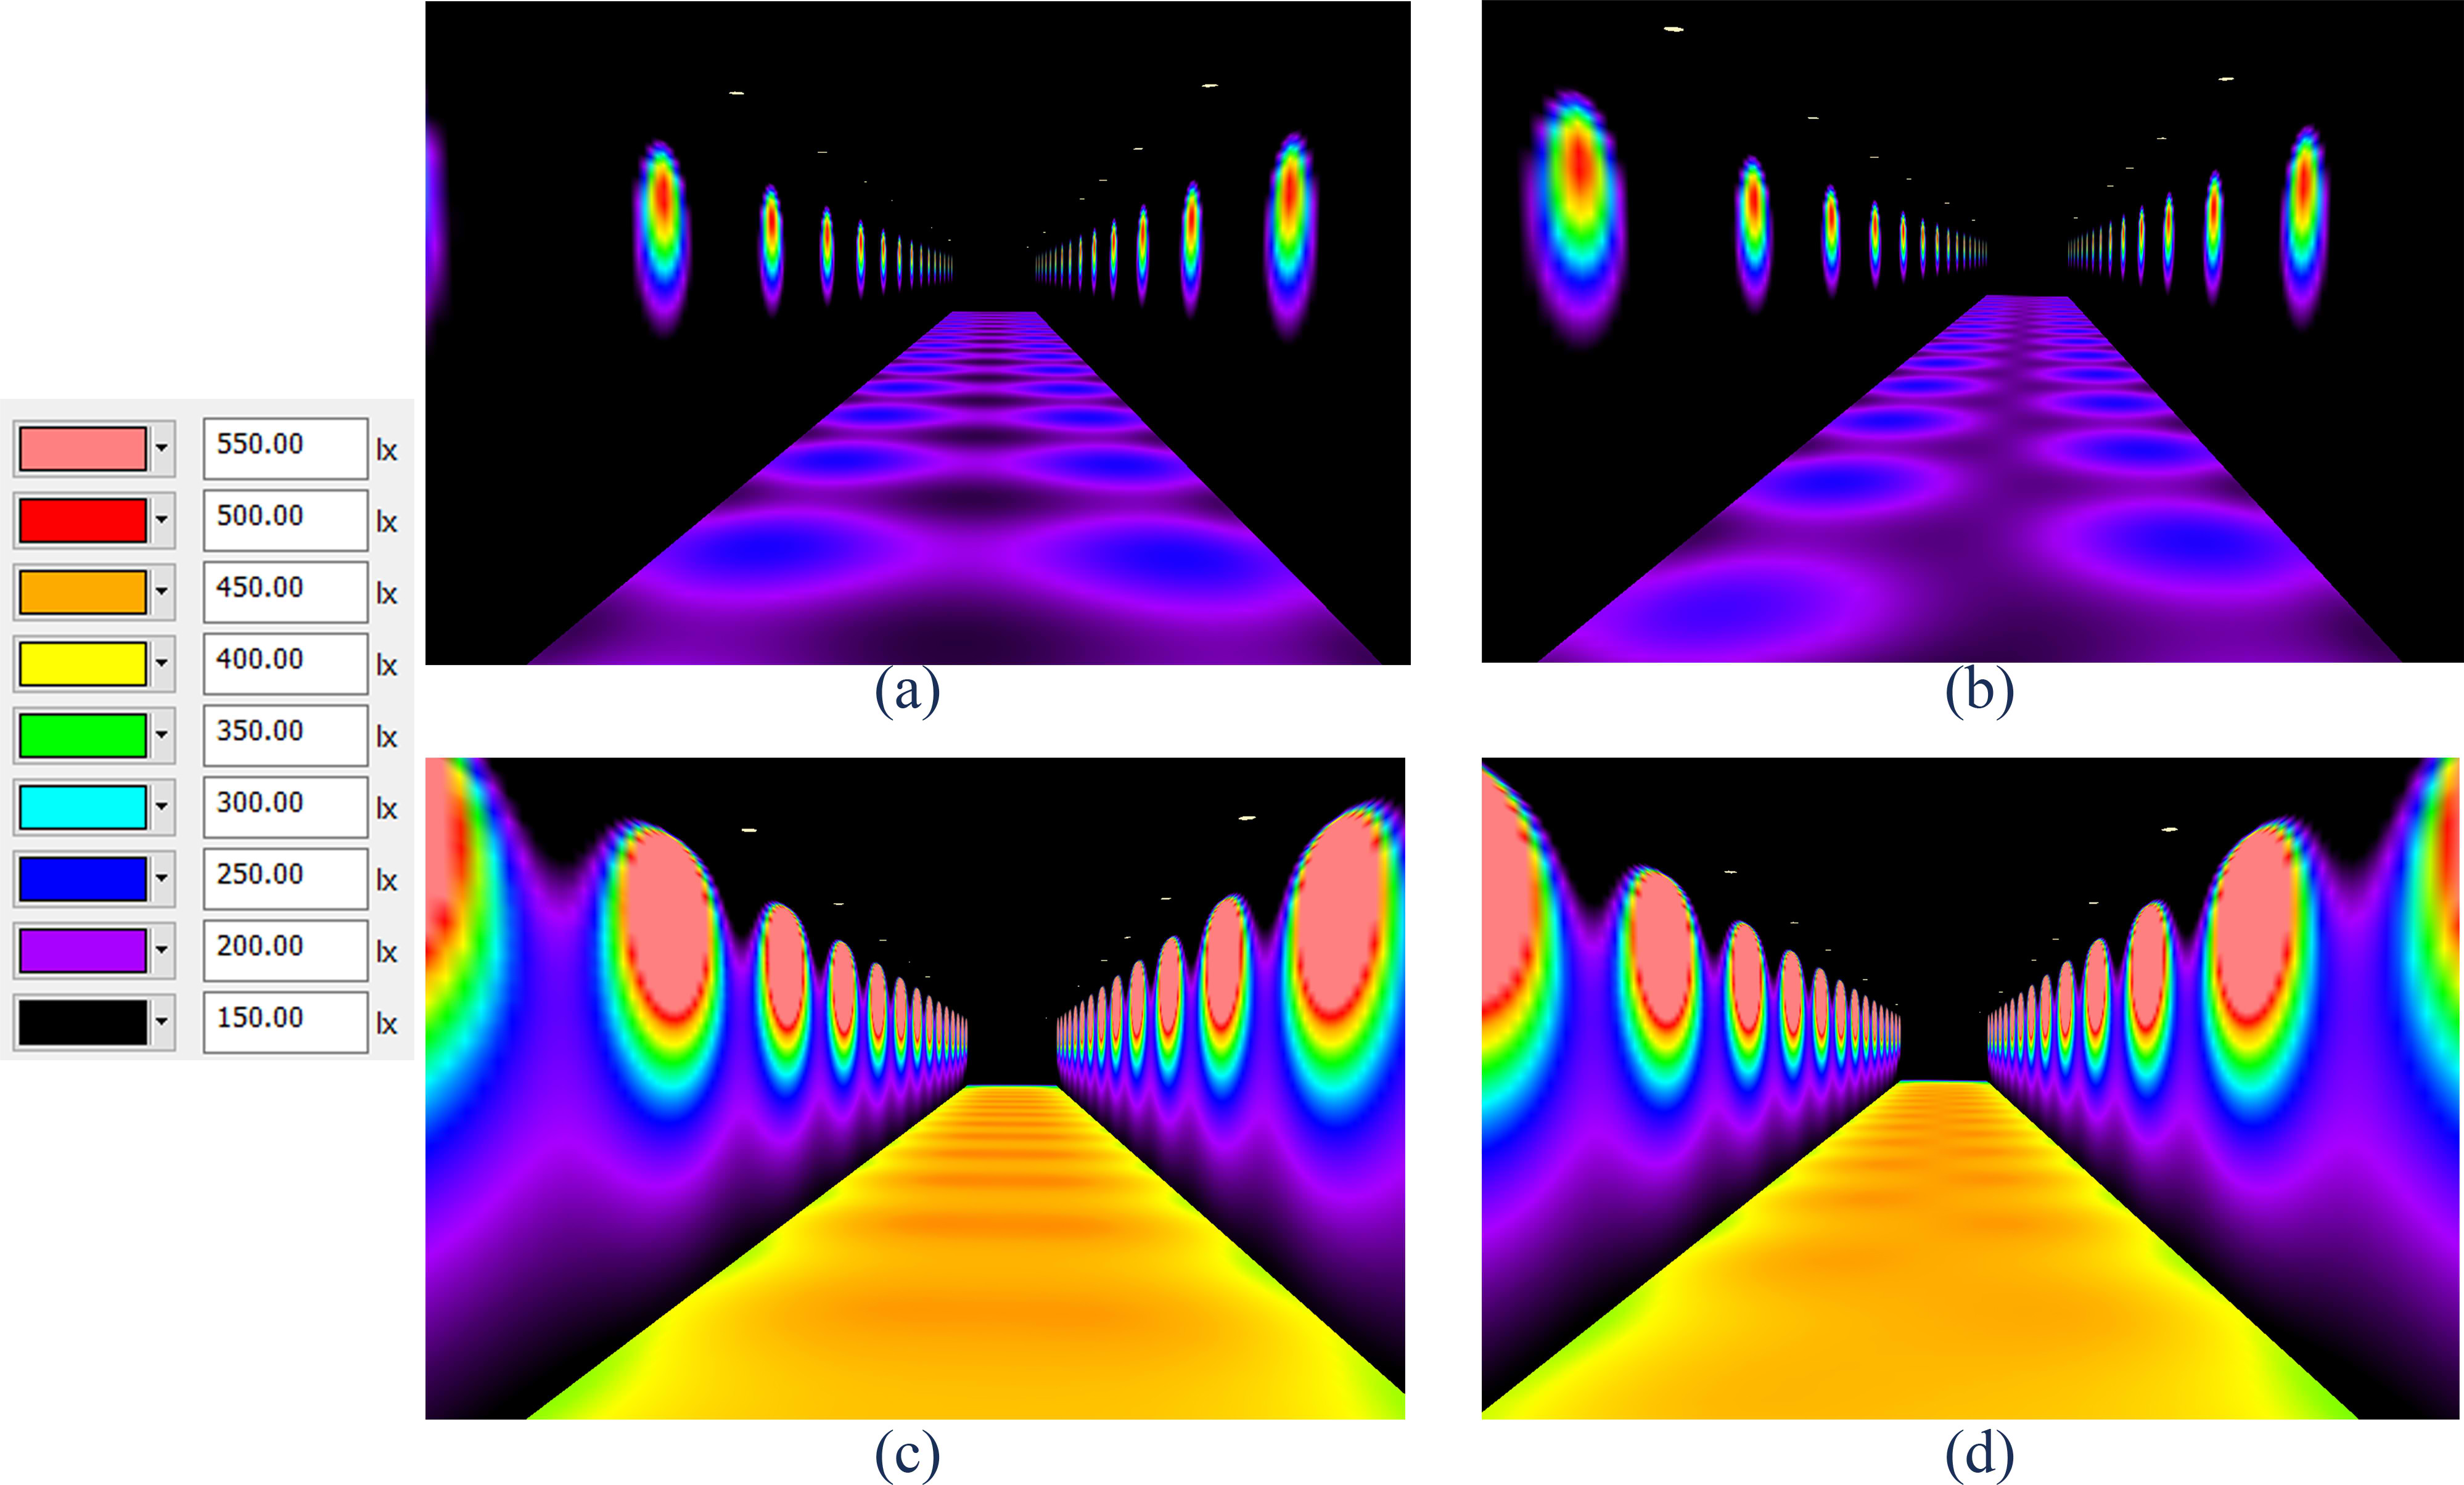 False colour images of direct illuminance on surfaces in scenes with (a) BZ1, δ = 0, (b) BZ1, δ = 1.5 m, (c) BZ5, δ = 0, (d) BZ5, δ = 1.5 m, simulated in DIALux 4.12.